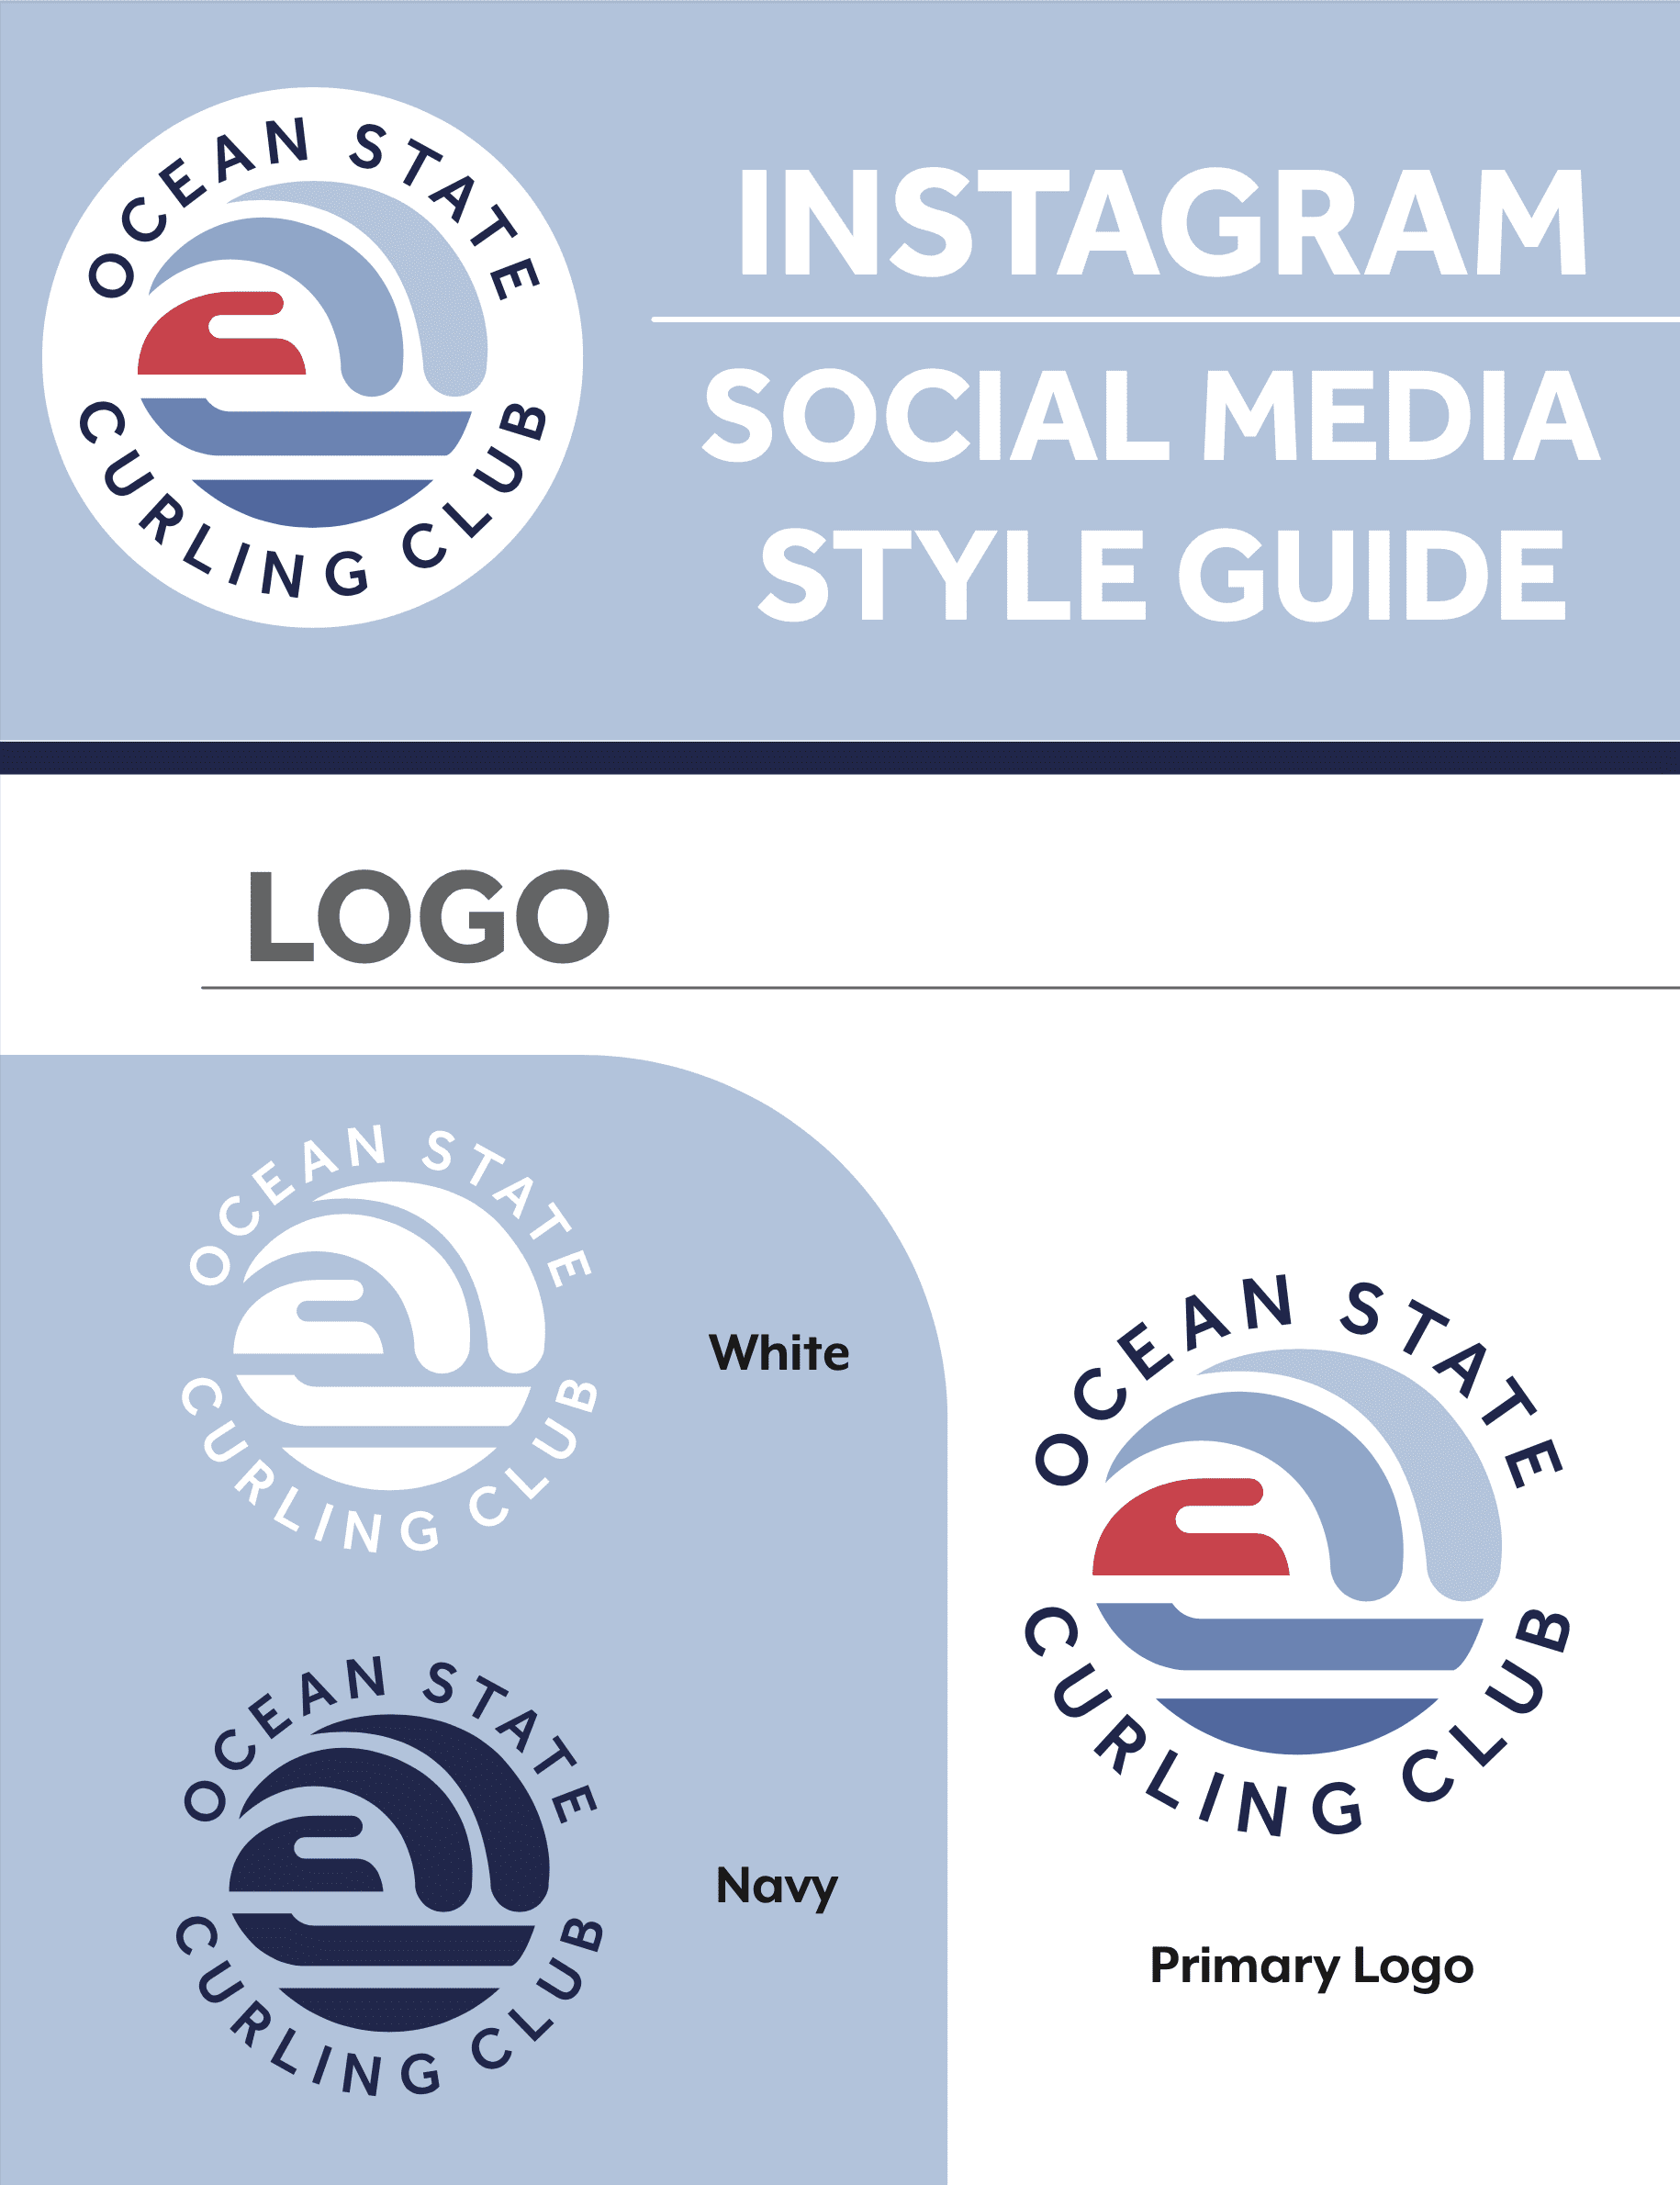 Social media style guide for OSCC Instagram page